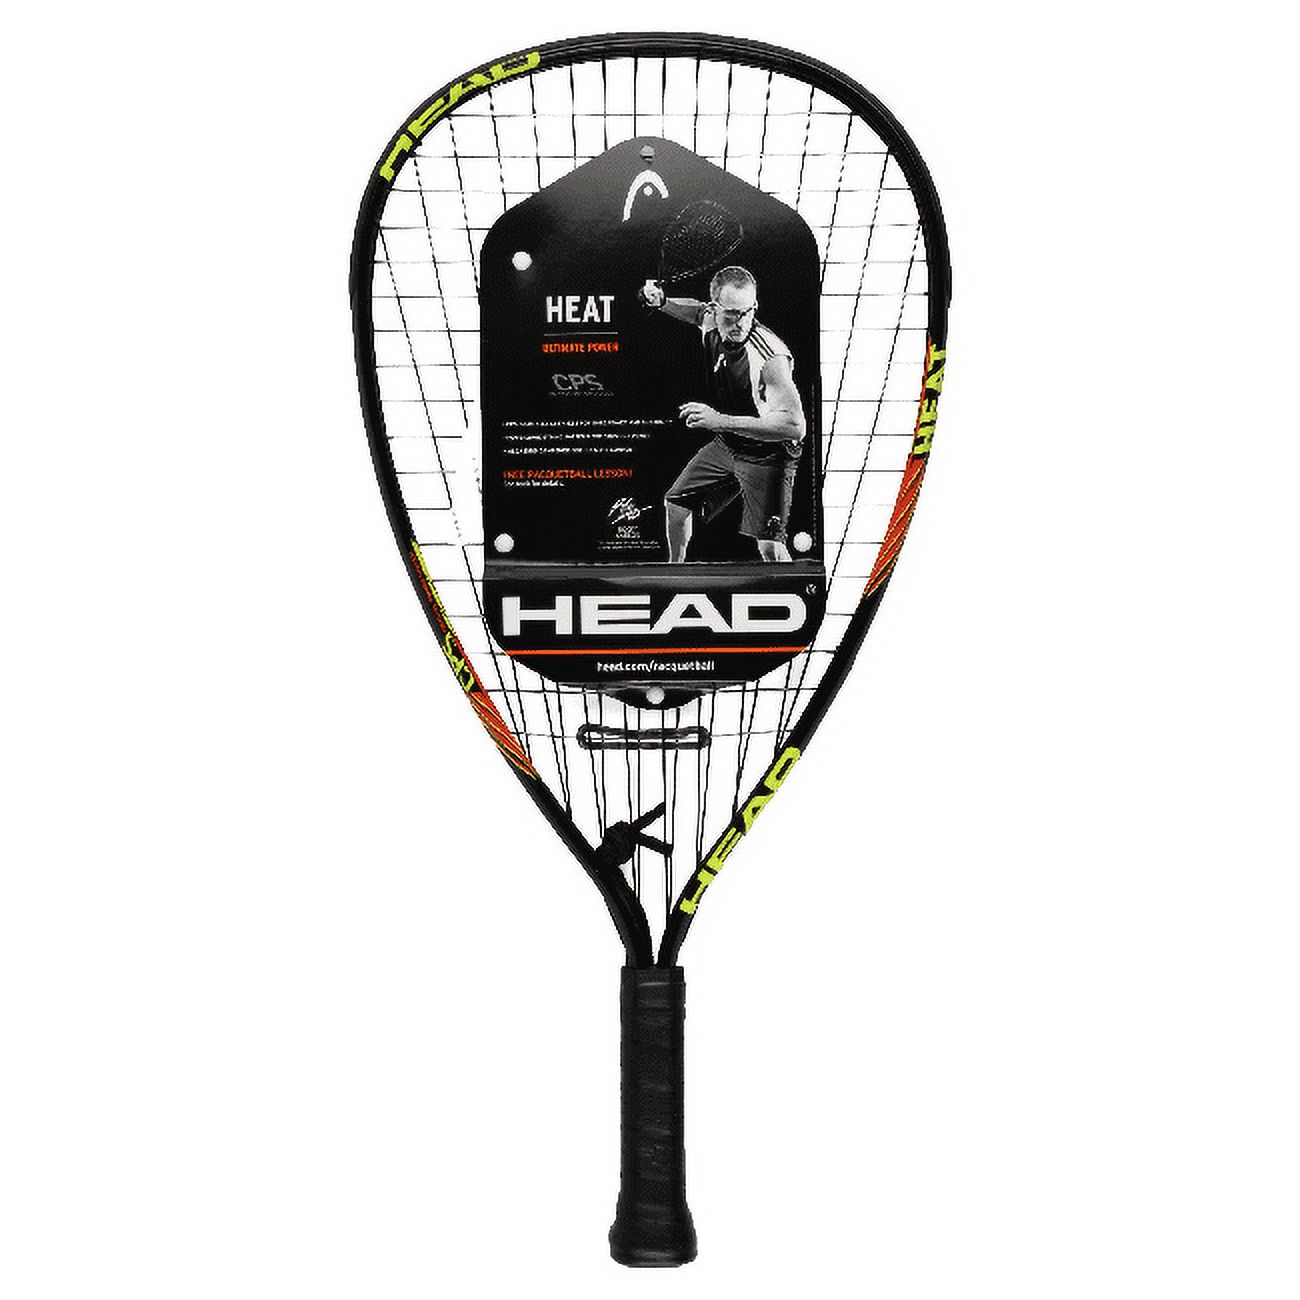 HEAD CPS Heat Racquetball Racquet, Pre-Strung, 107 Sq. in. Head Size, 6.7 Ounces, Black/Yellow - image 2 of 2